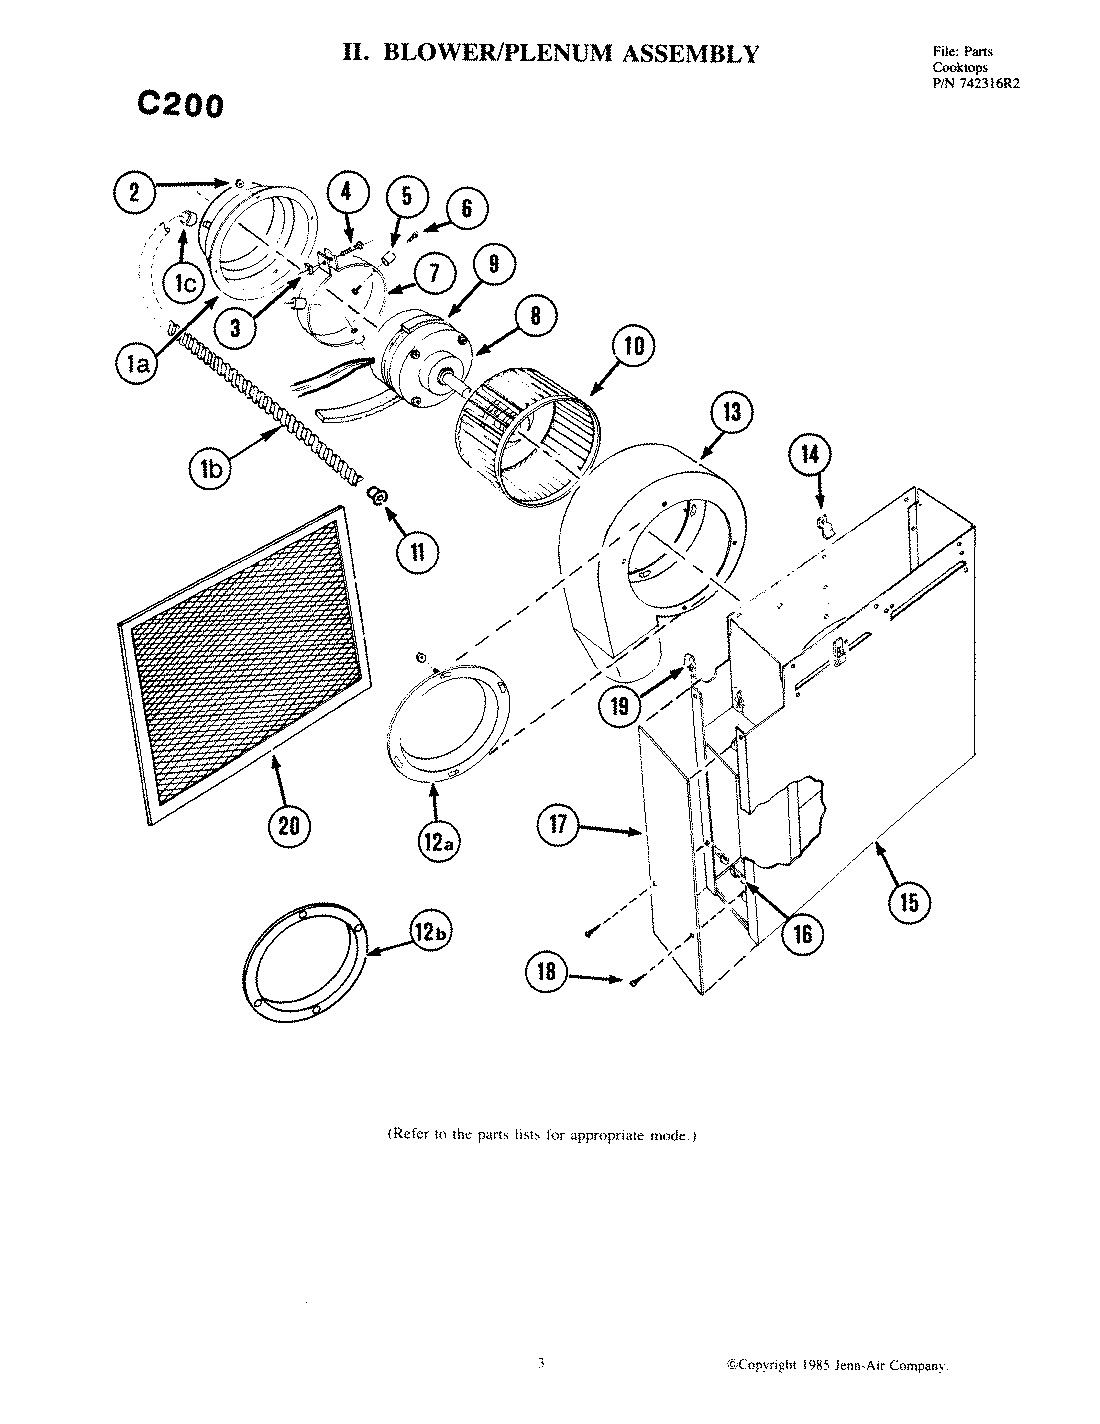 01 - BLOWER ASSEMBLY